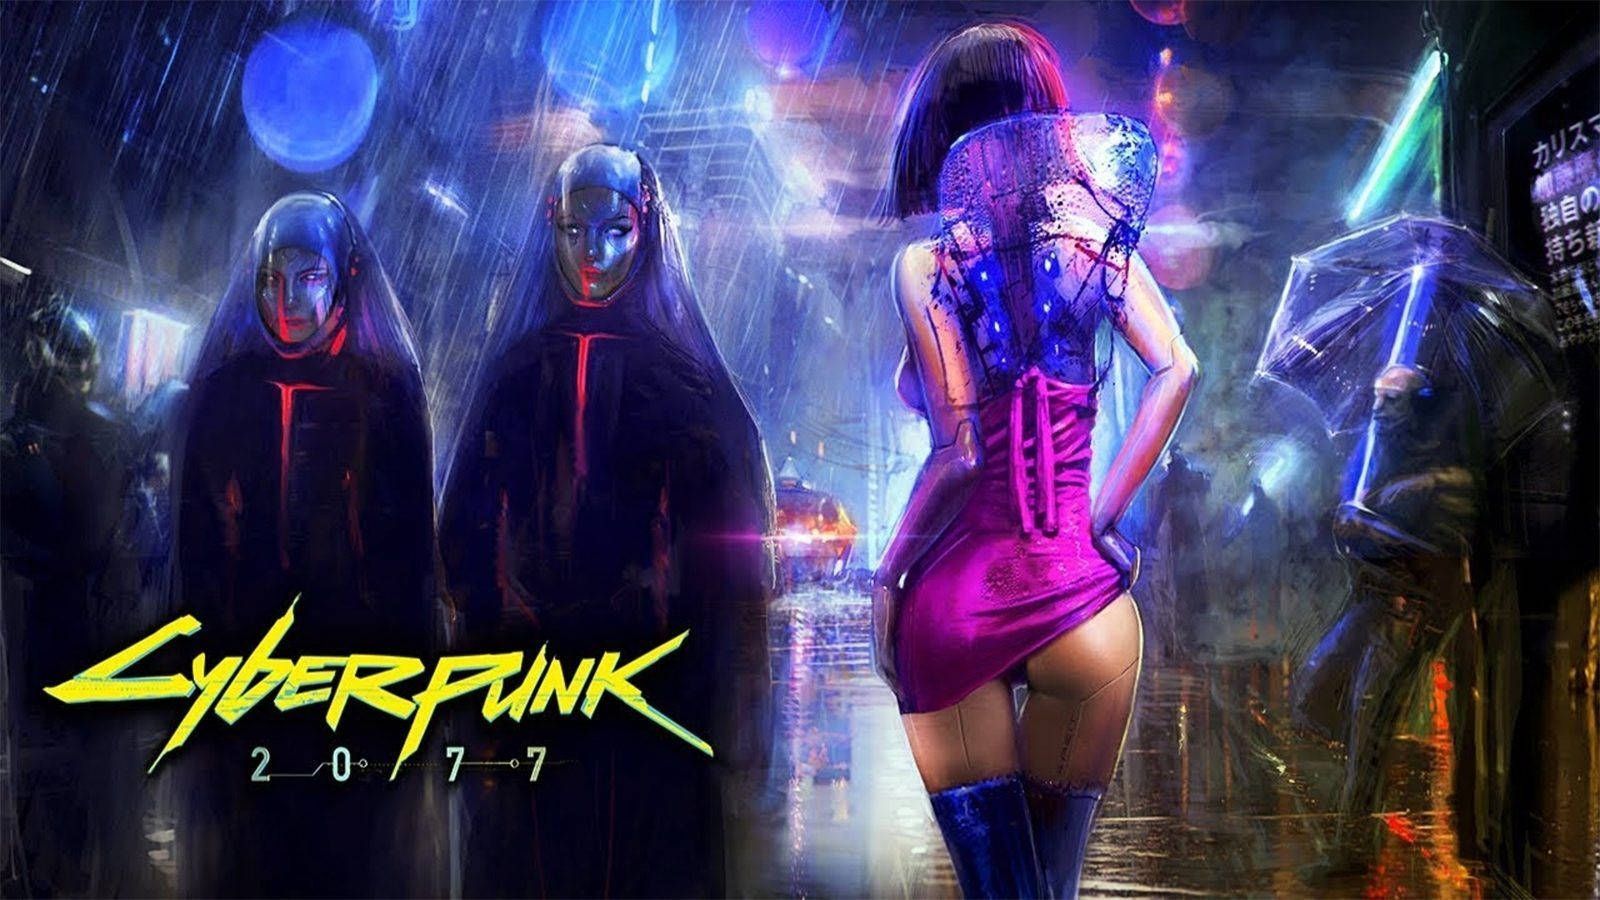 A woman in a short skirt and thigh high boots stands in front of three people in full Cyberpunk 2077 gear. - Cyberpunk 2077